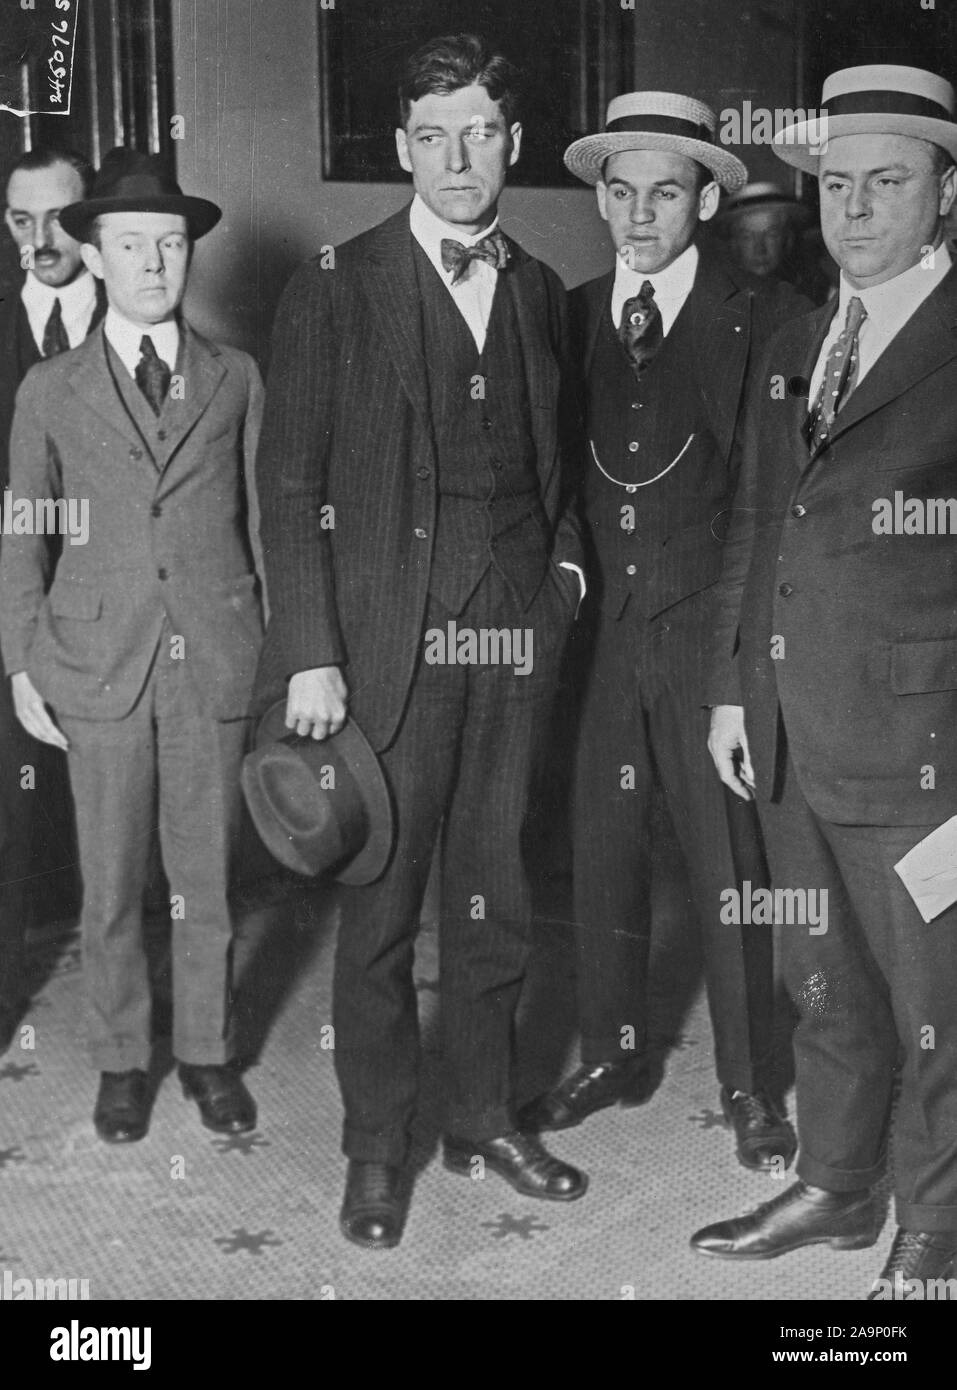 Jeremiah A. O'Leary (with hat off) charged with treason to the U.S., shortly after his arrival in New York City, on his way to the Federal building. O'Leary was captured by Federal agents on a chicken farm in the state of Washington where he fled to evade trial. Stock Photo